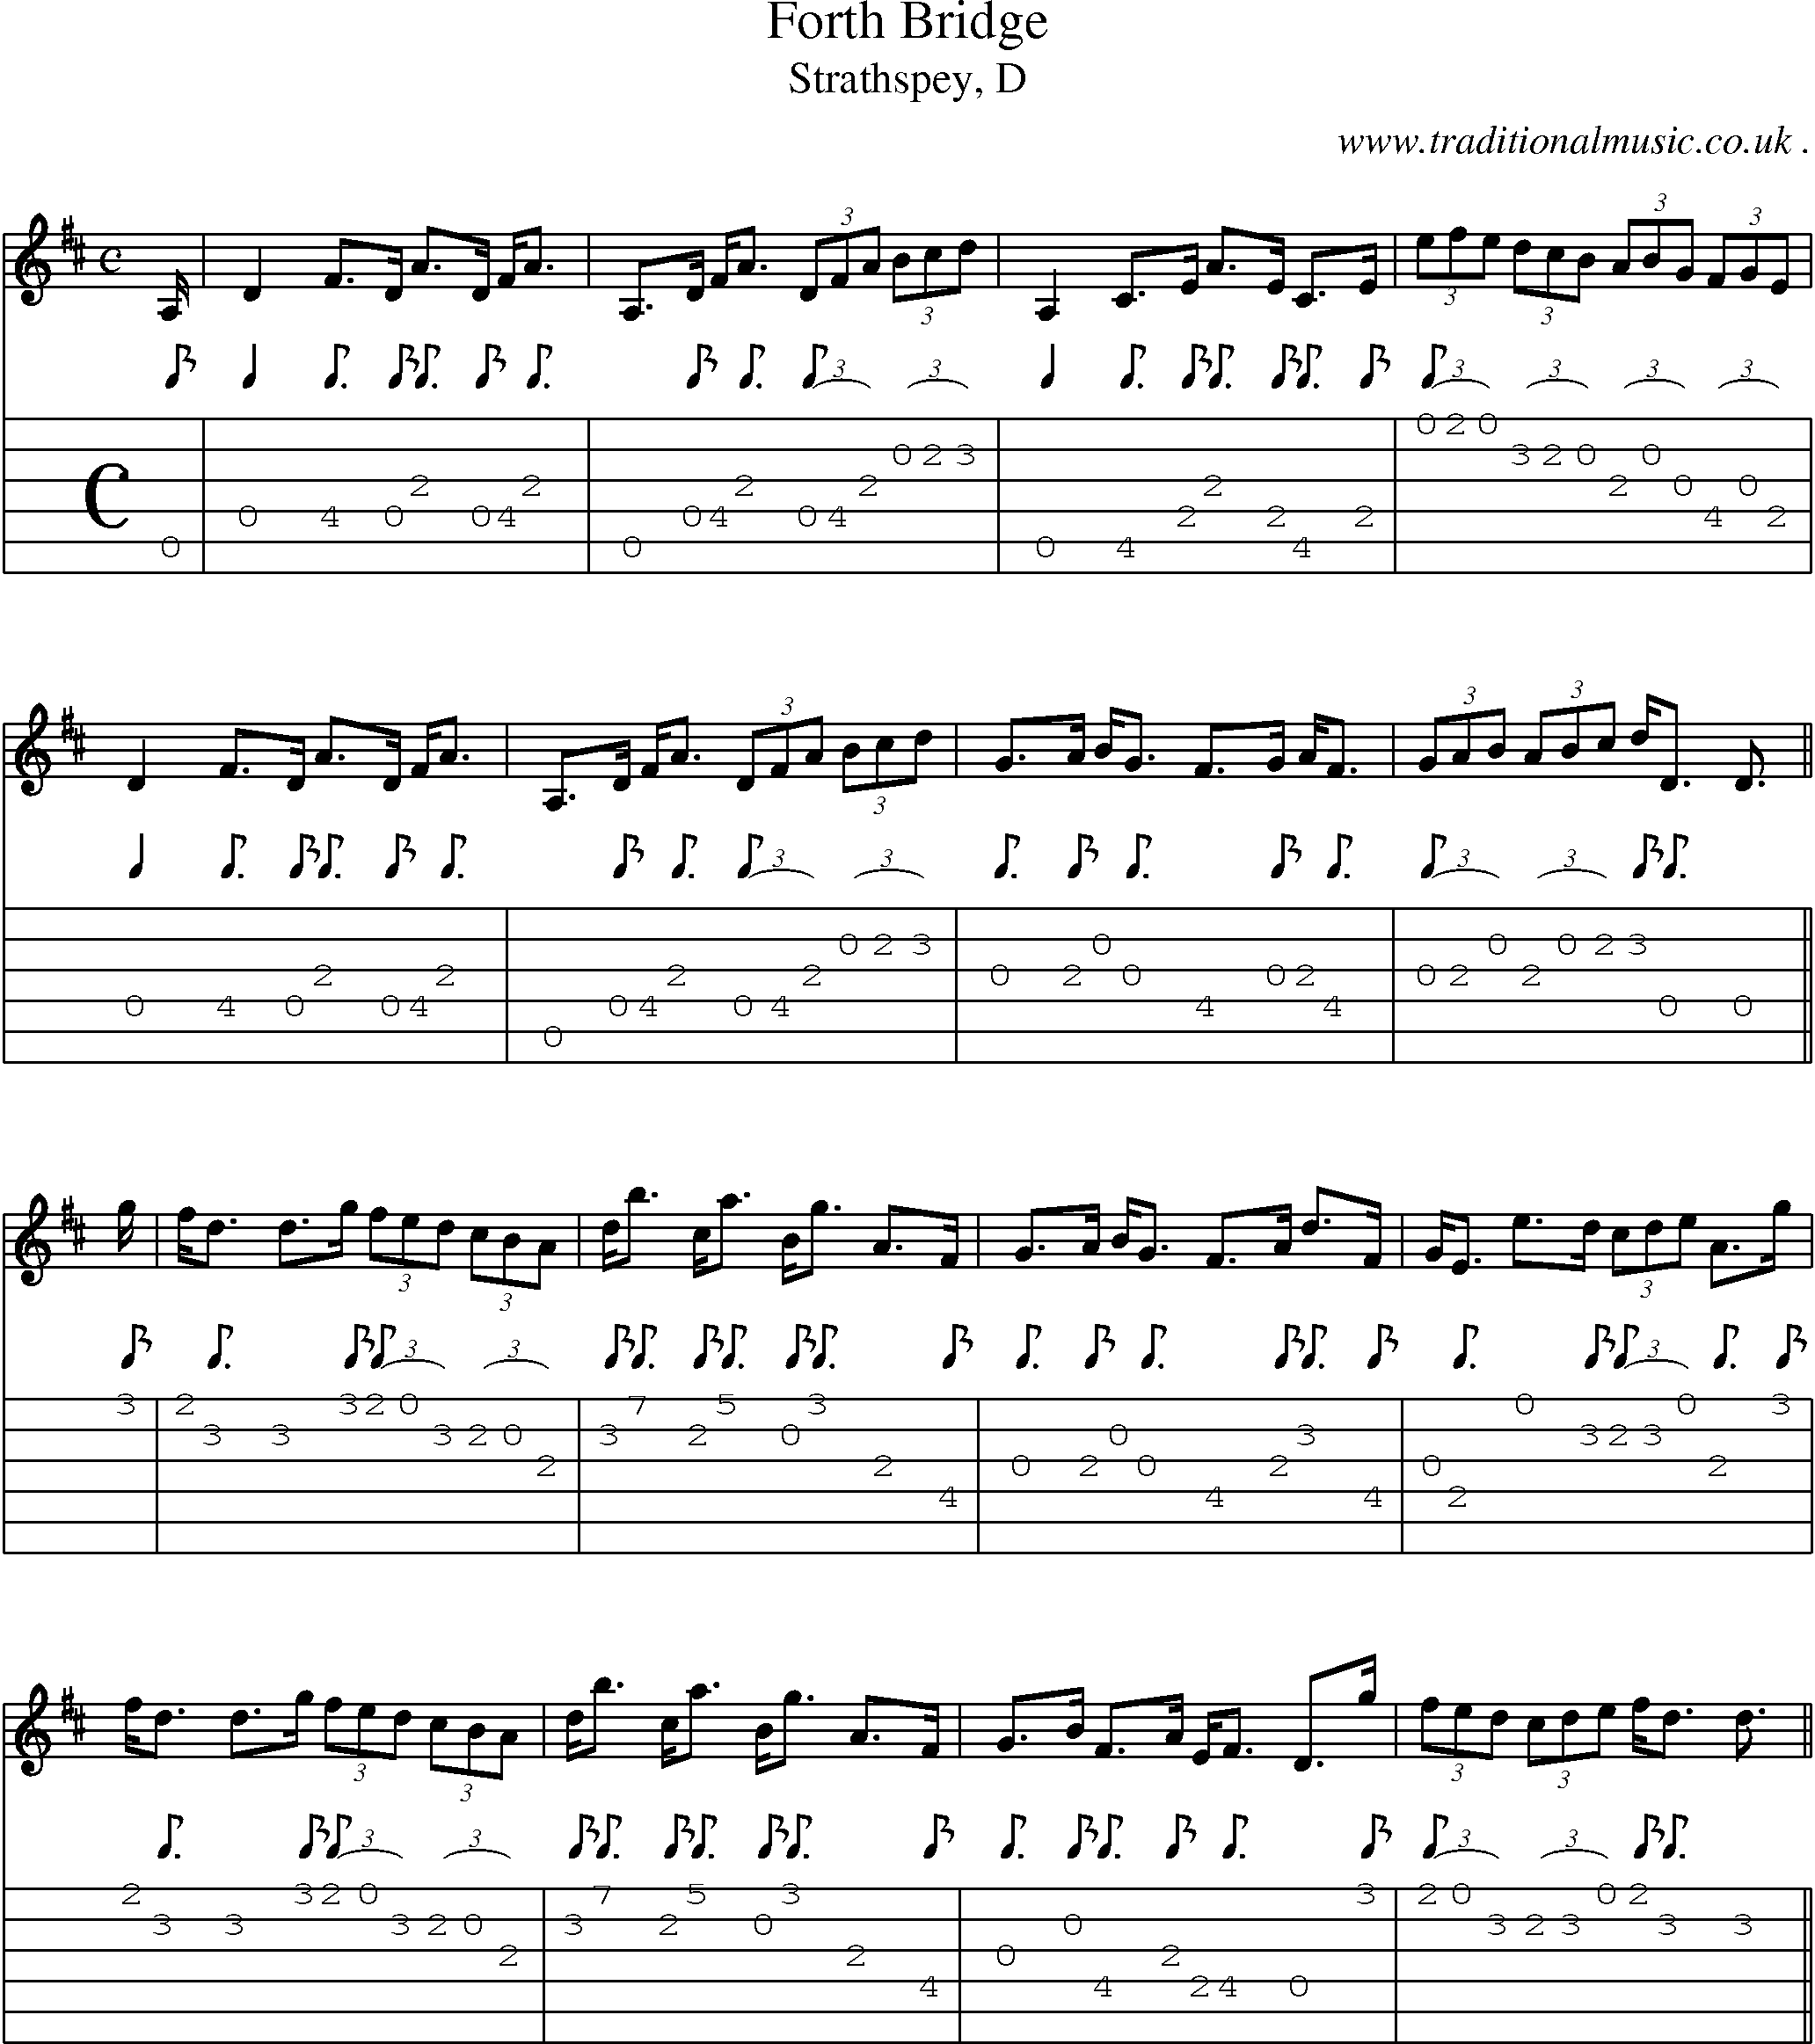 Sheet-music  score, Chords and Guitar Tabs for Forth Bridge